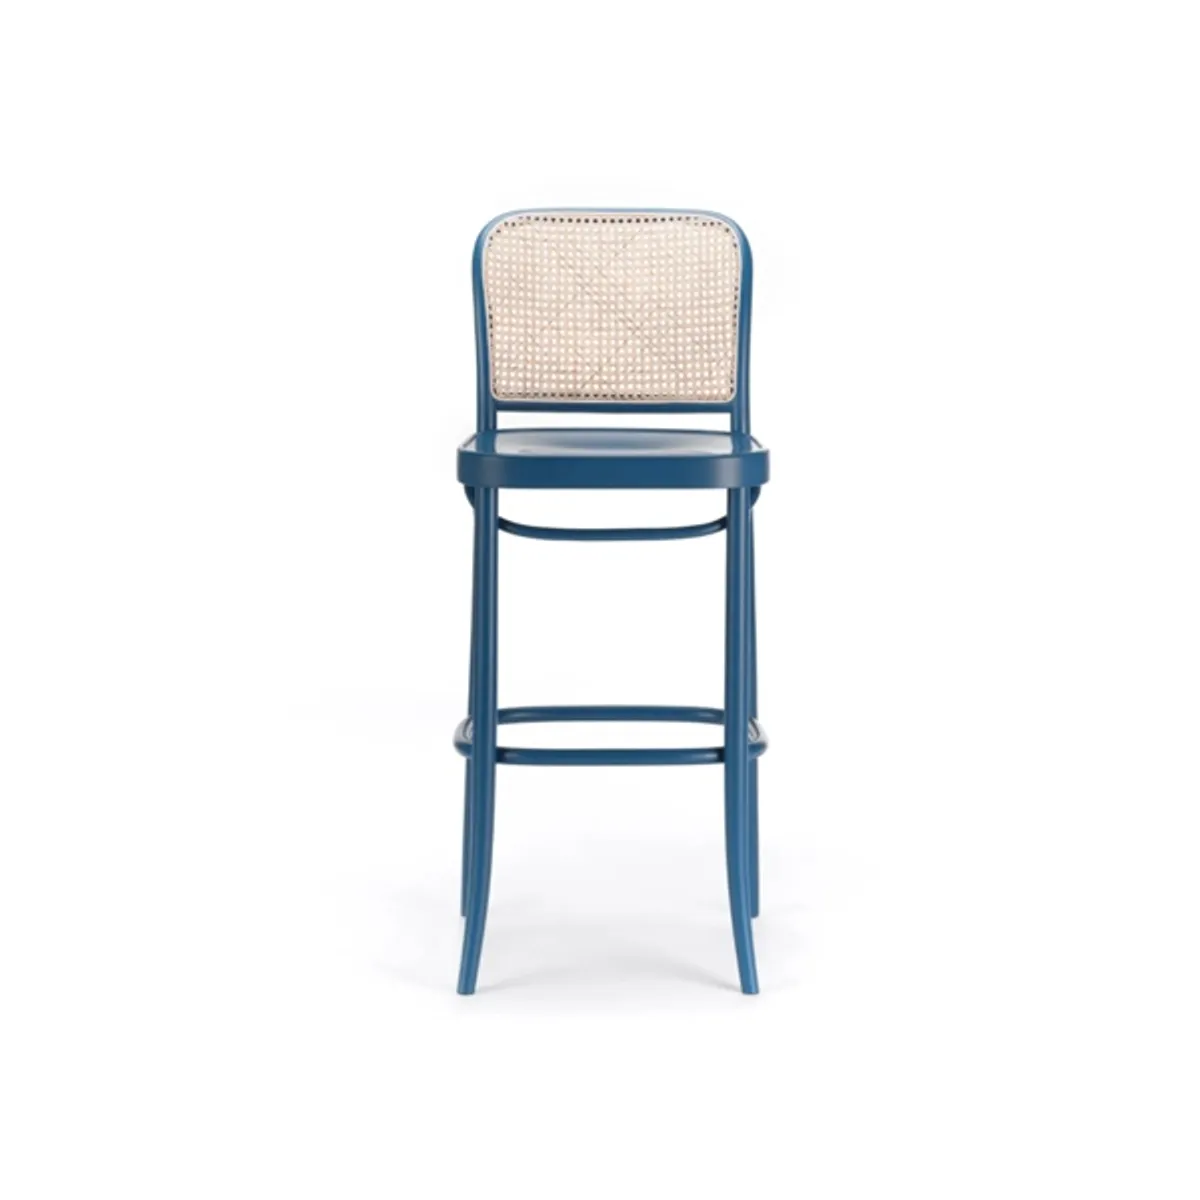 Bombay wood bar stool Inside Out Contracts5